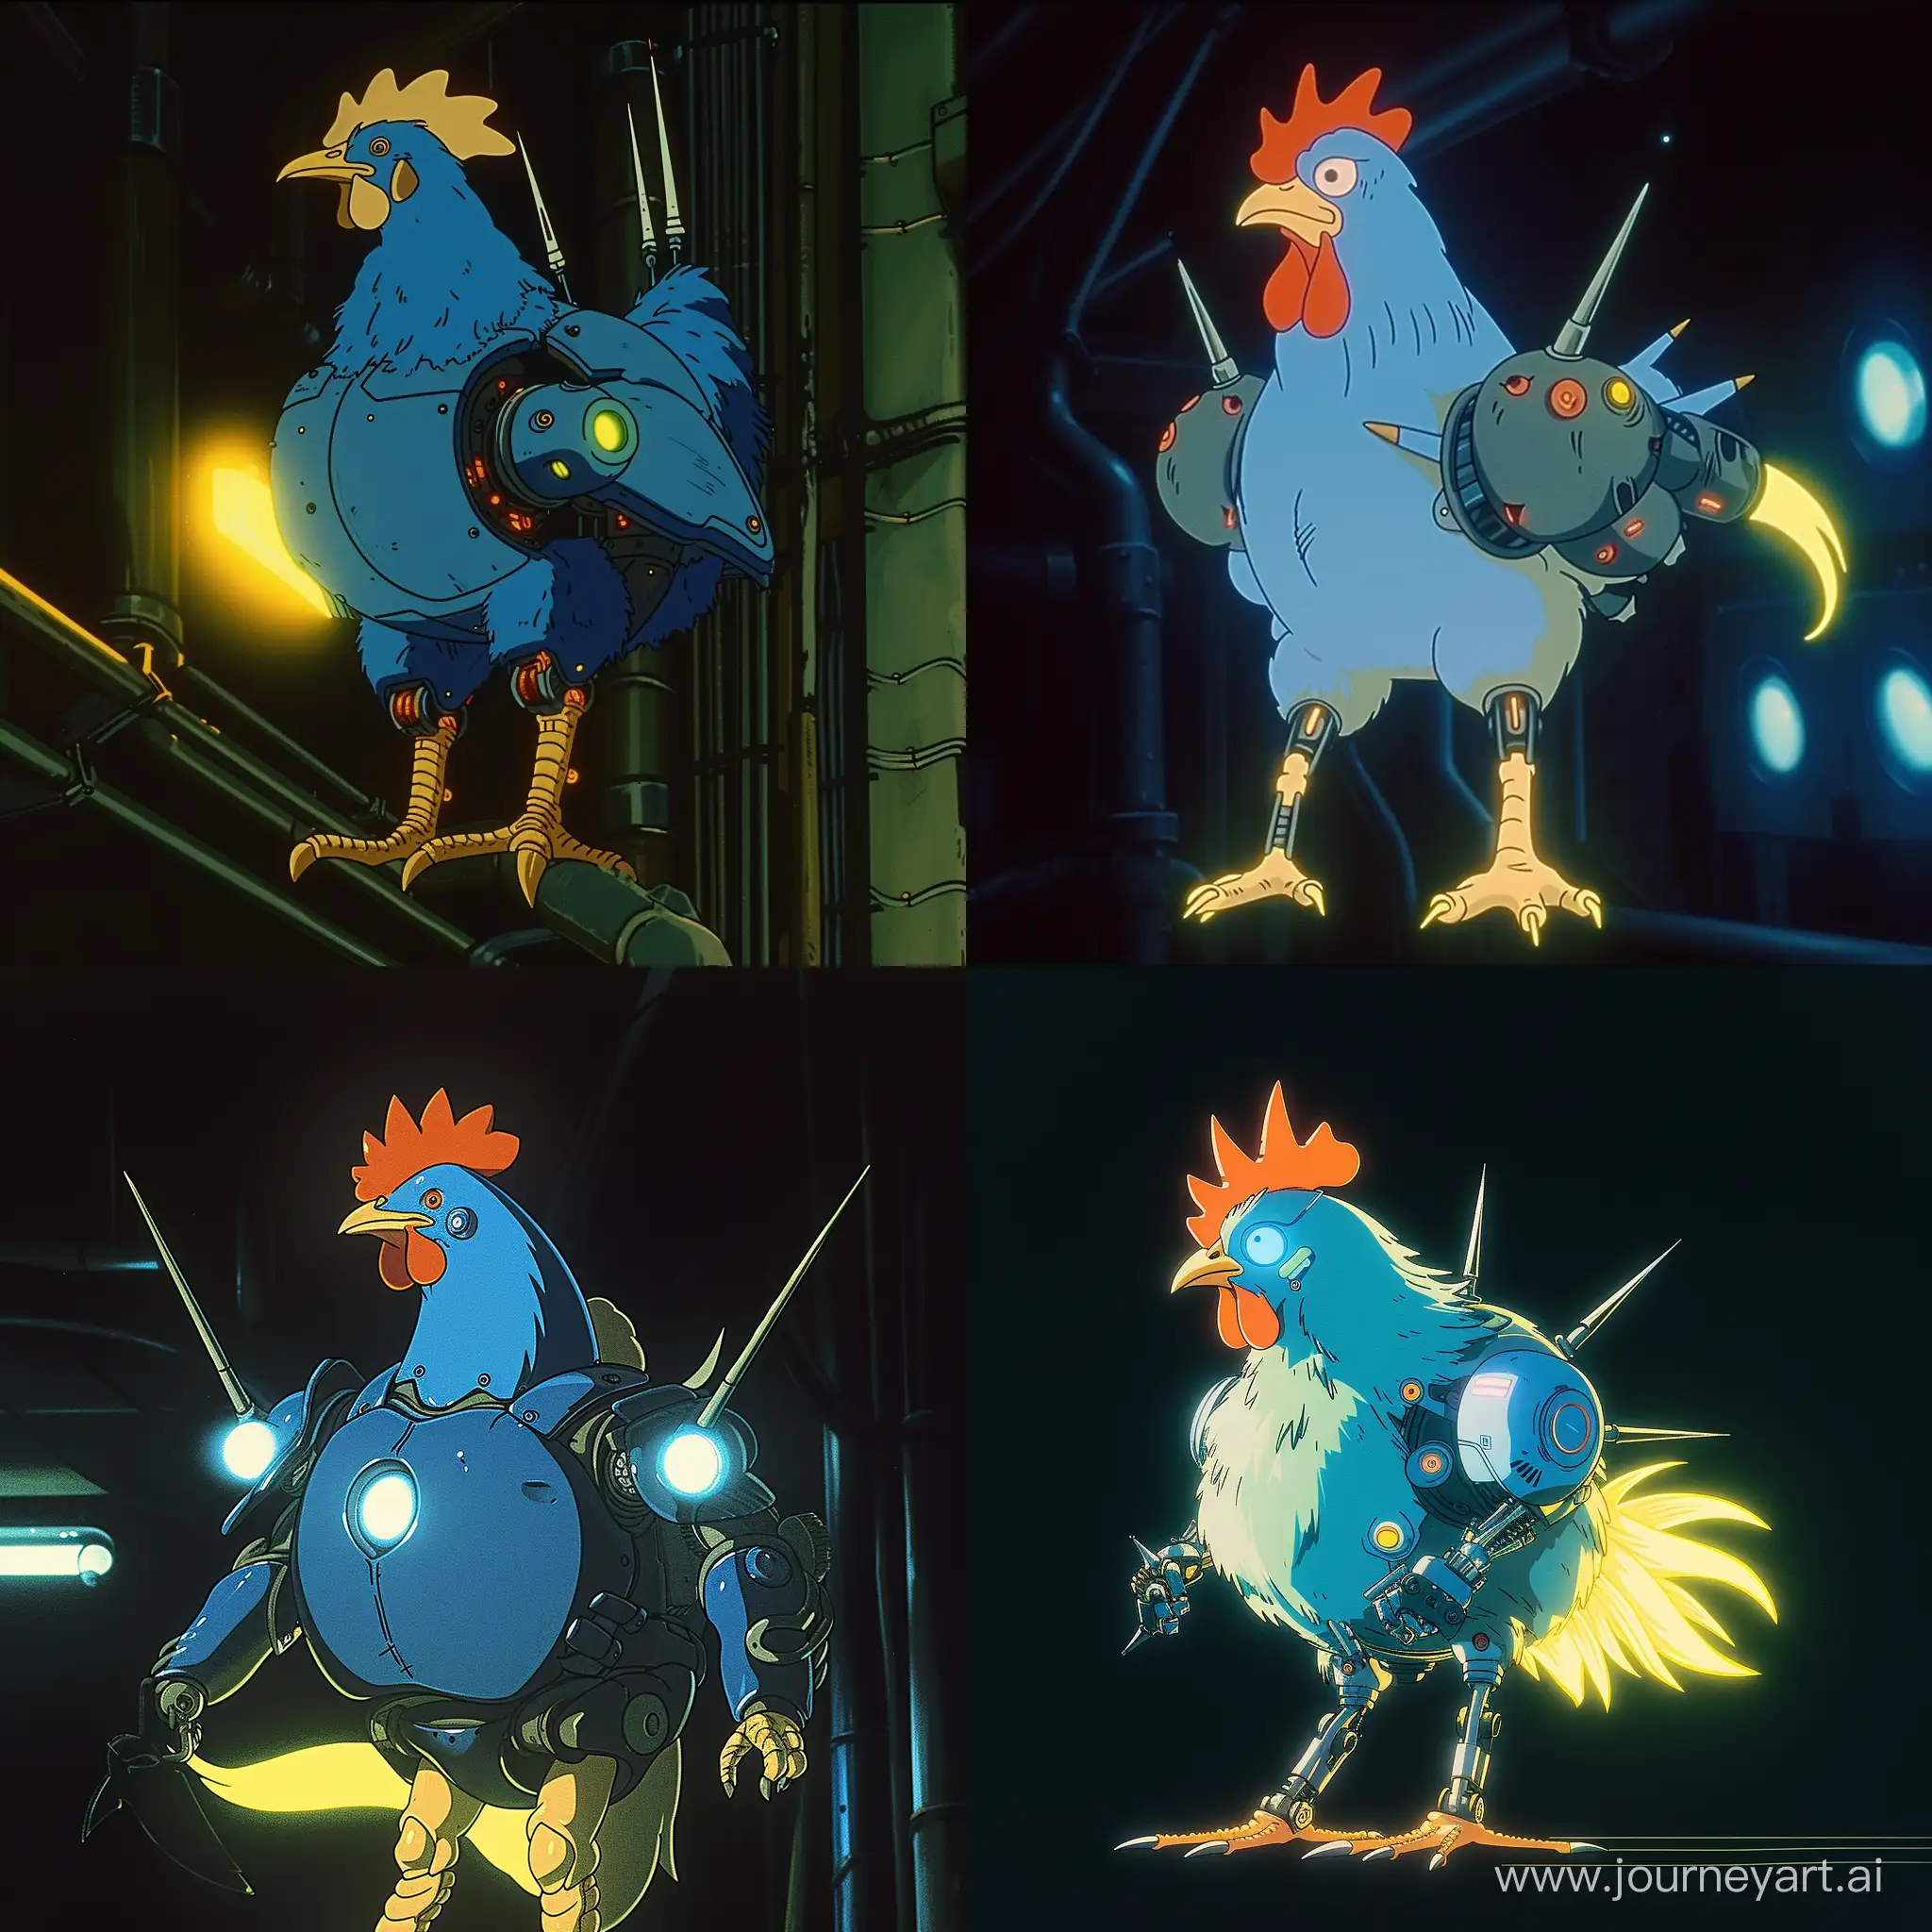 Whimsical-1990s-AnimeInspired-Cyborg-Chicken-with-Glowing-Tail-and-Spikes